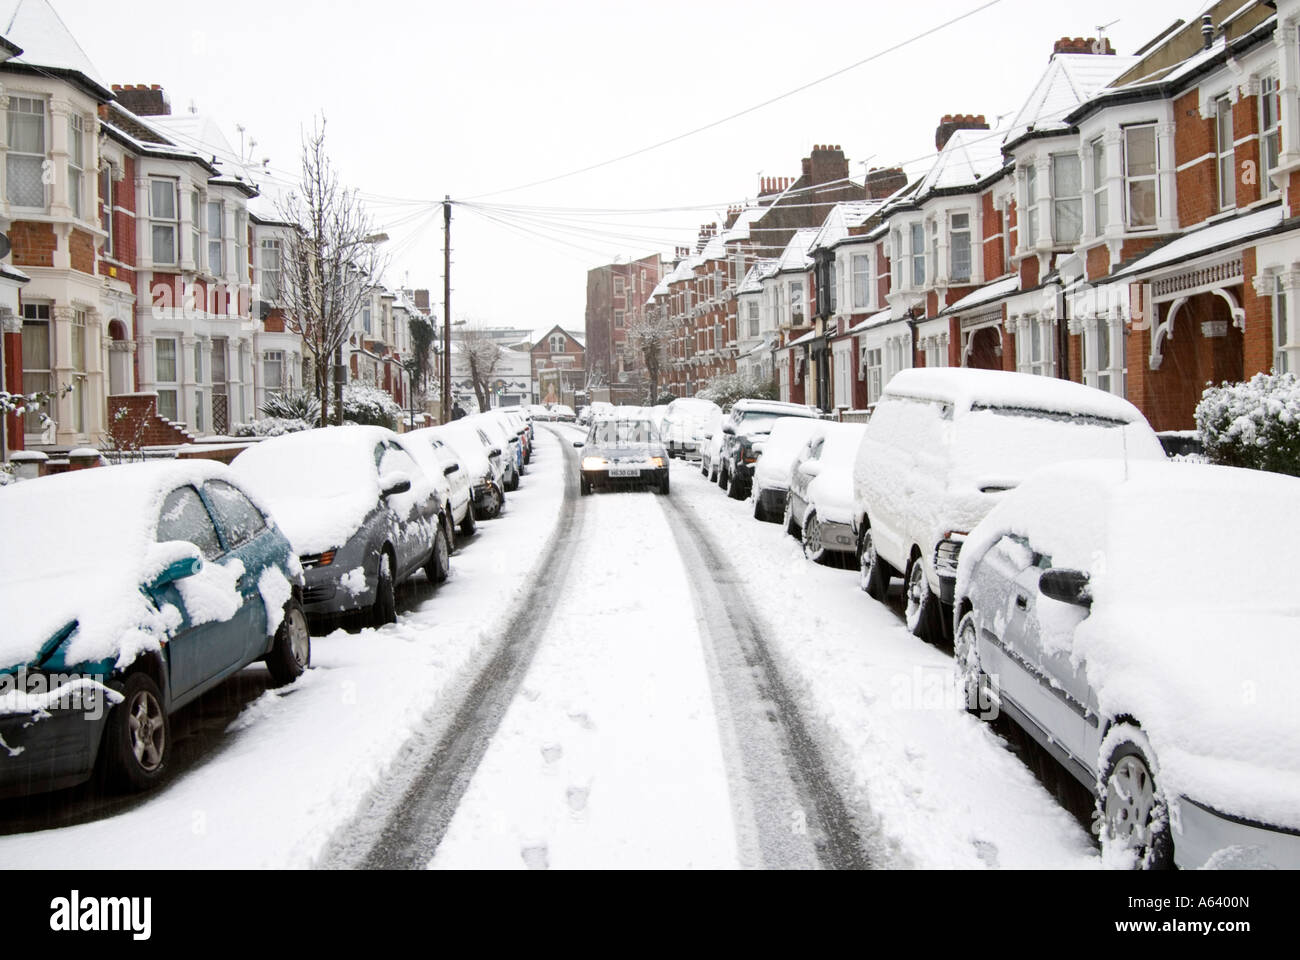 Snow covered cars in residential street, London England UK Stock Photo